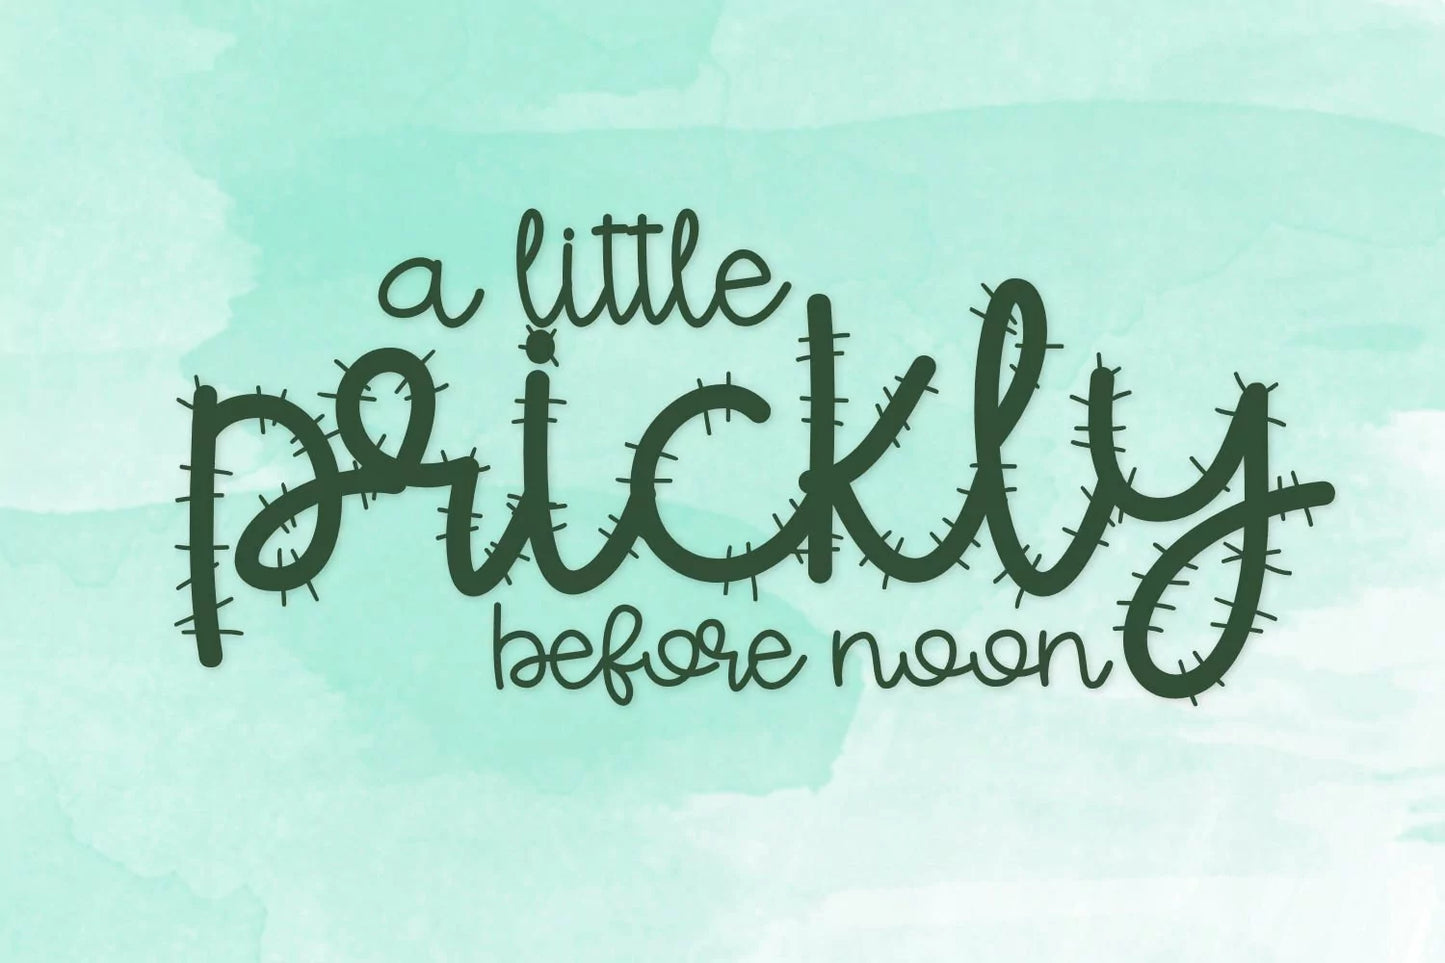 Fancactus - A Prickly Font With Doodles